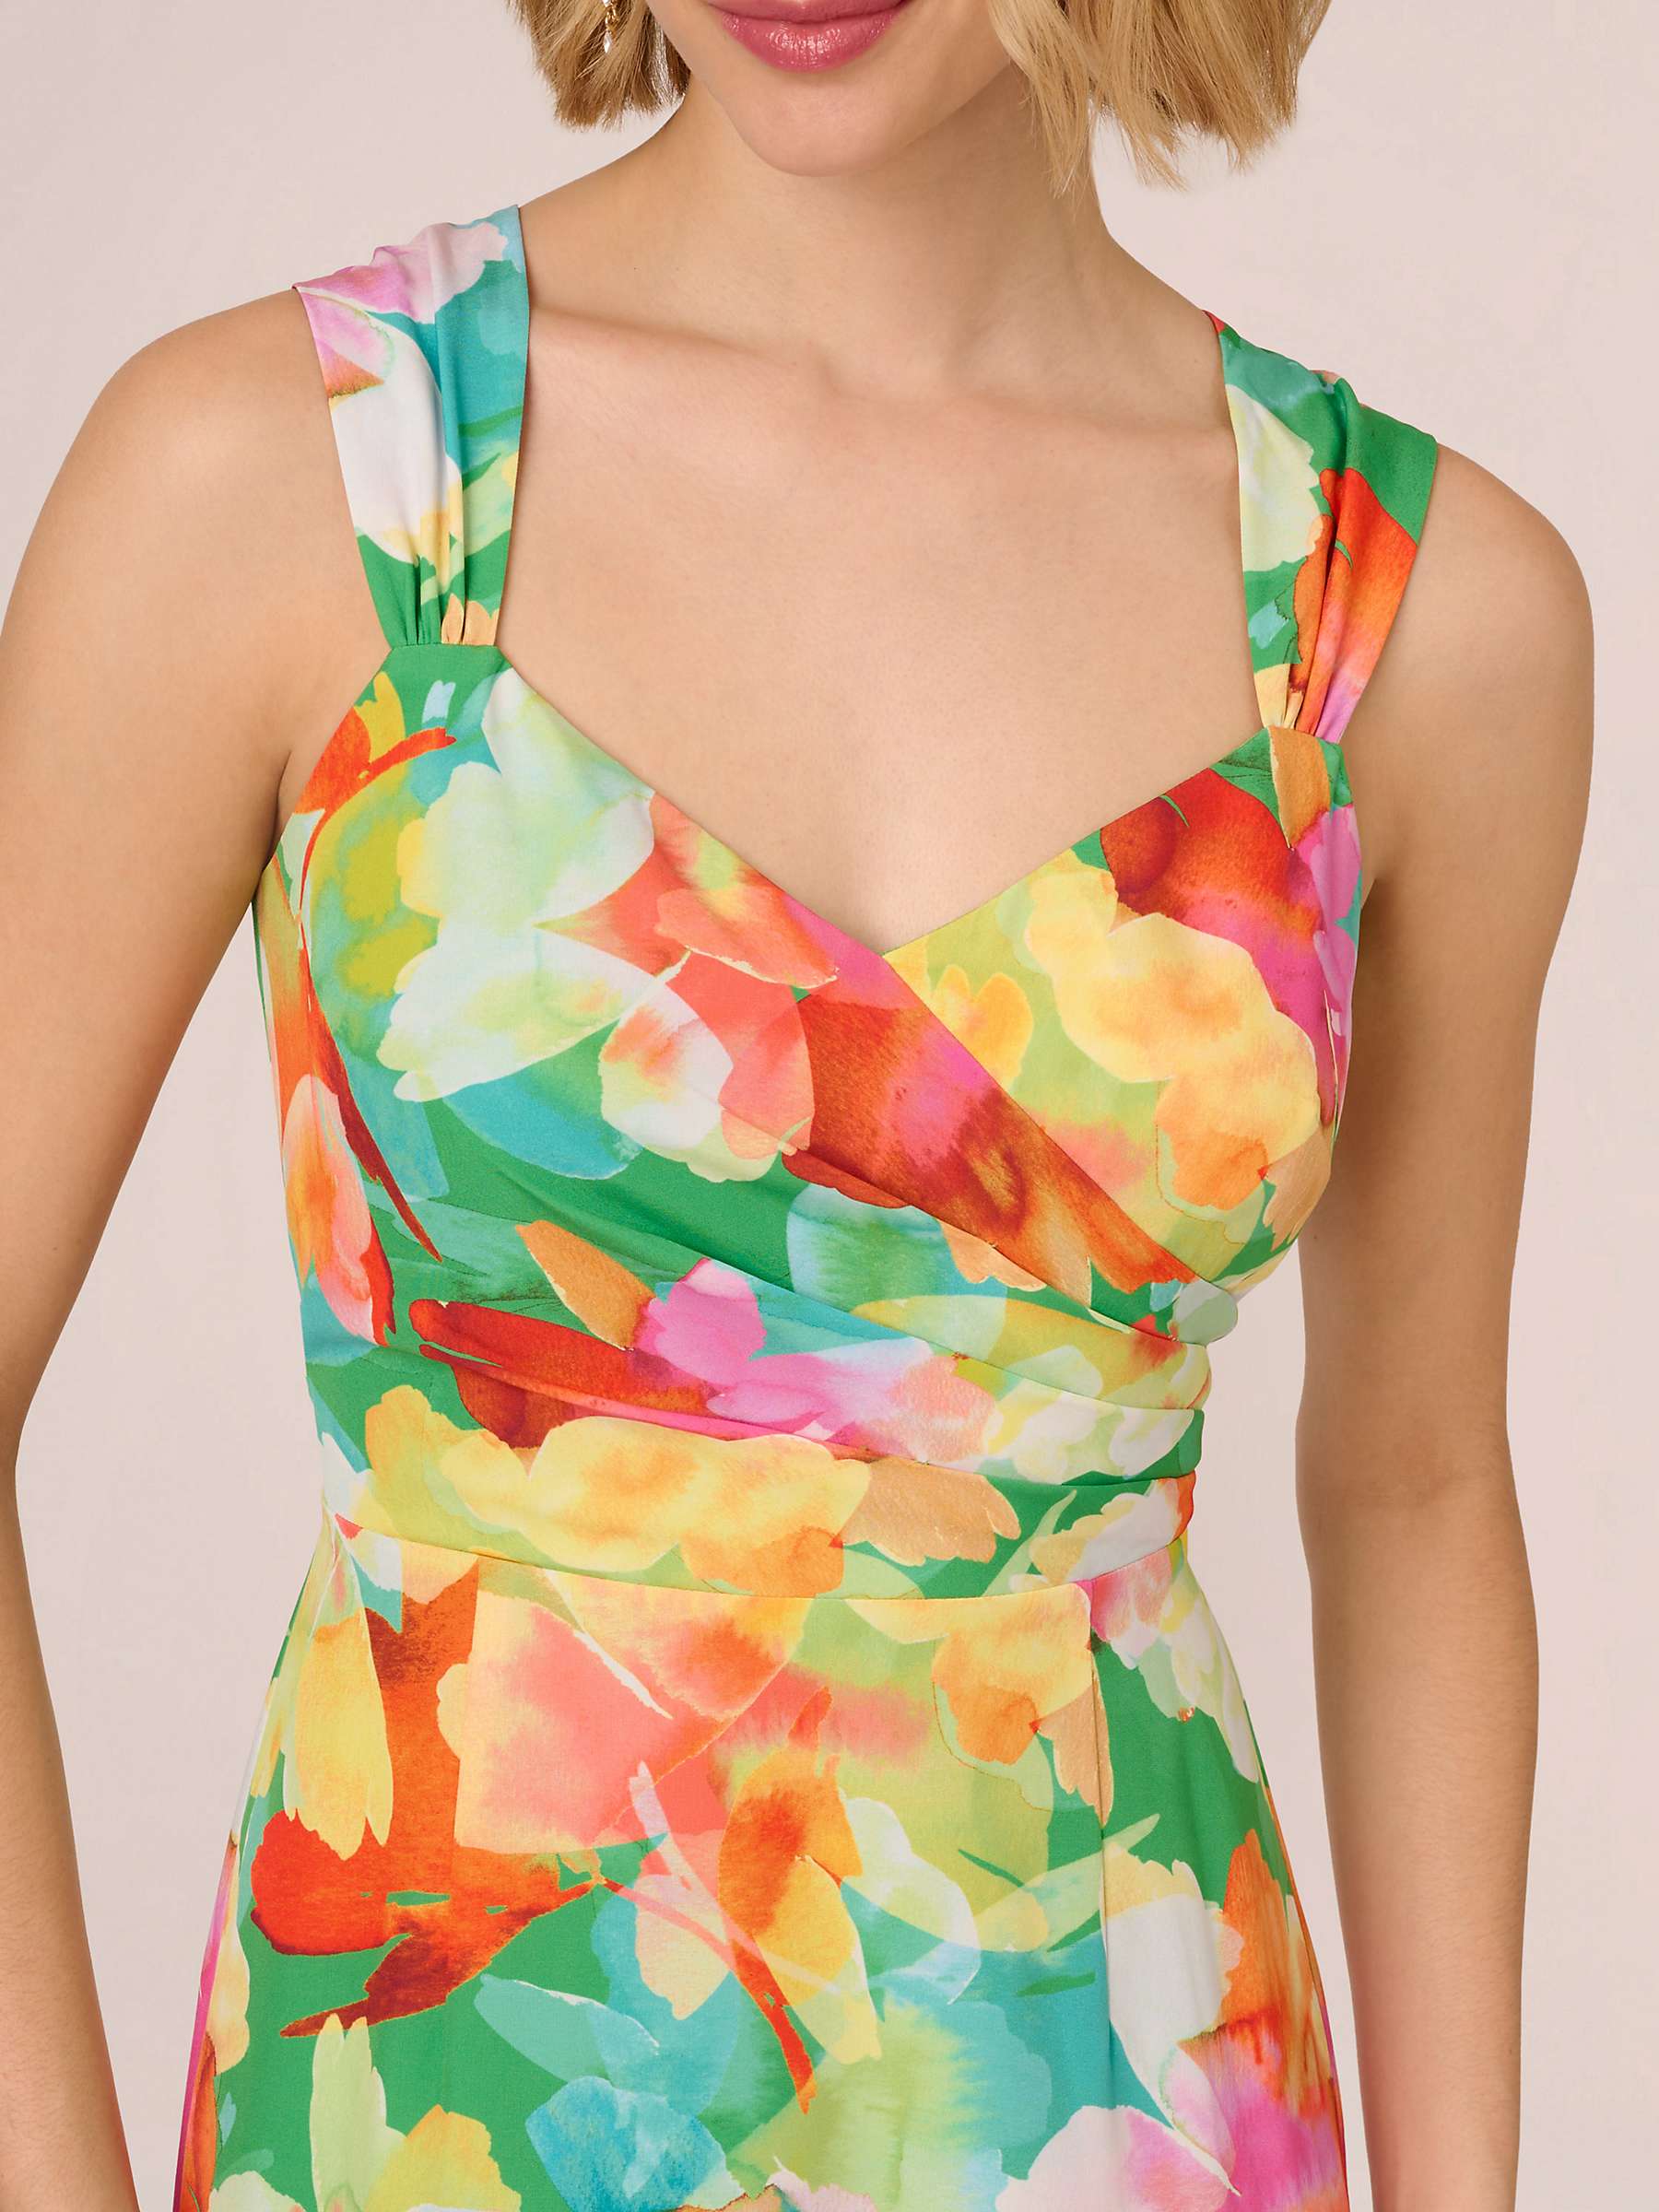 Buy Adrianna Papell Floral Hi-Low Dress, Green/Multi Online at johnlewis.com